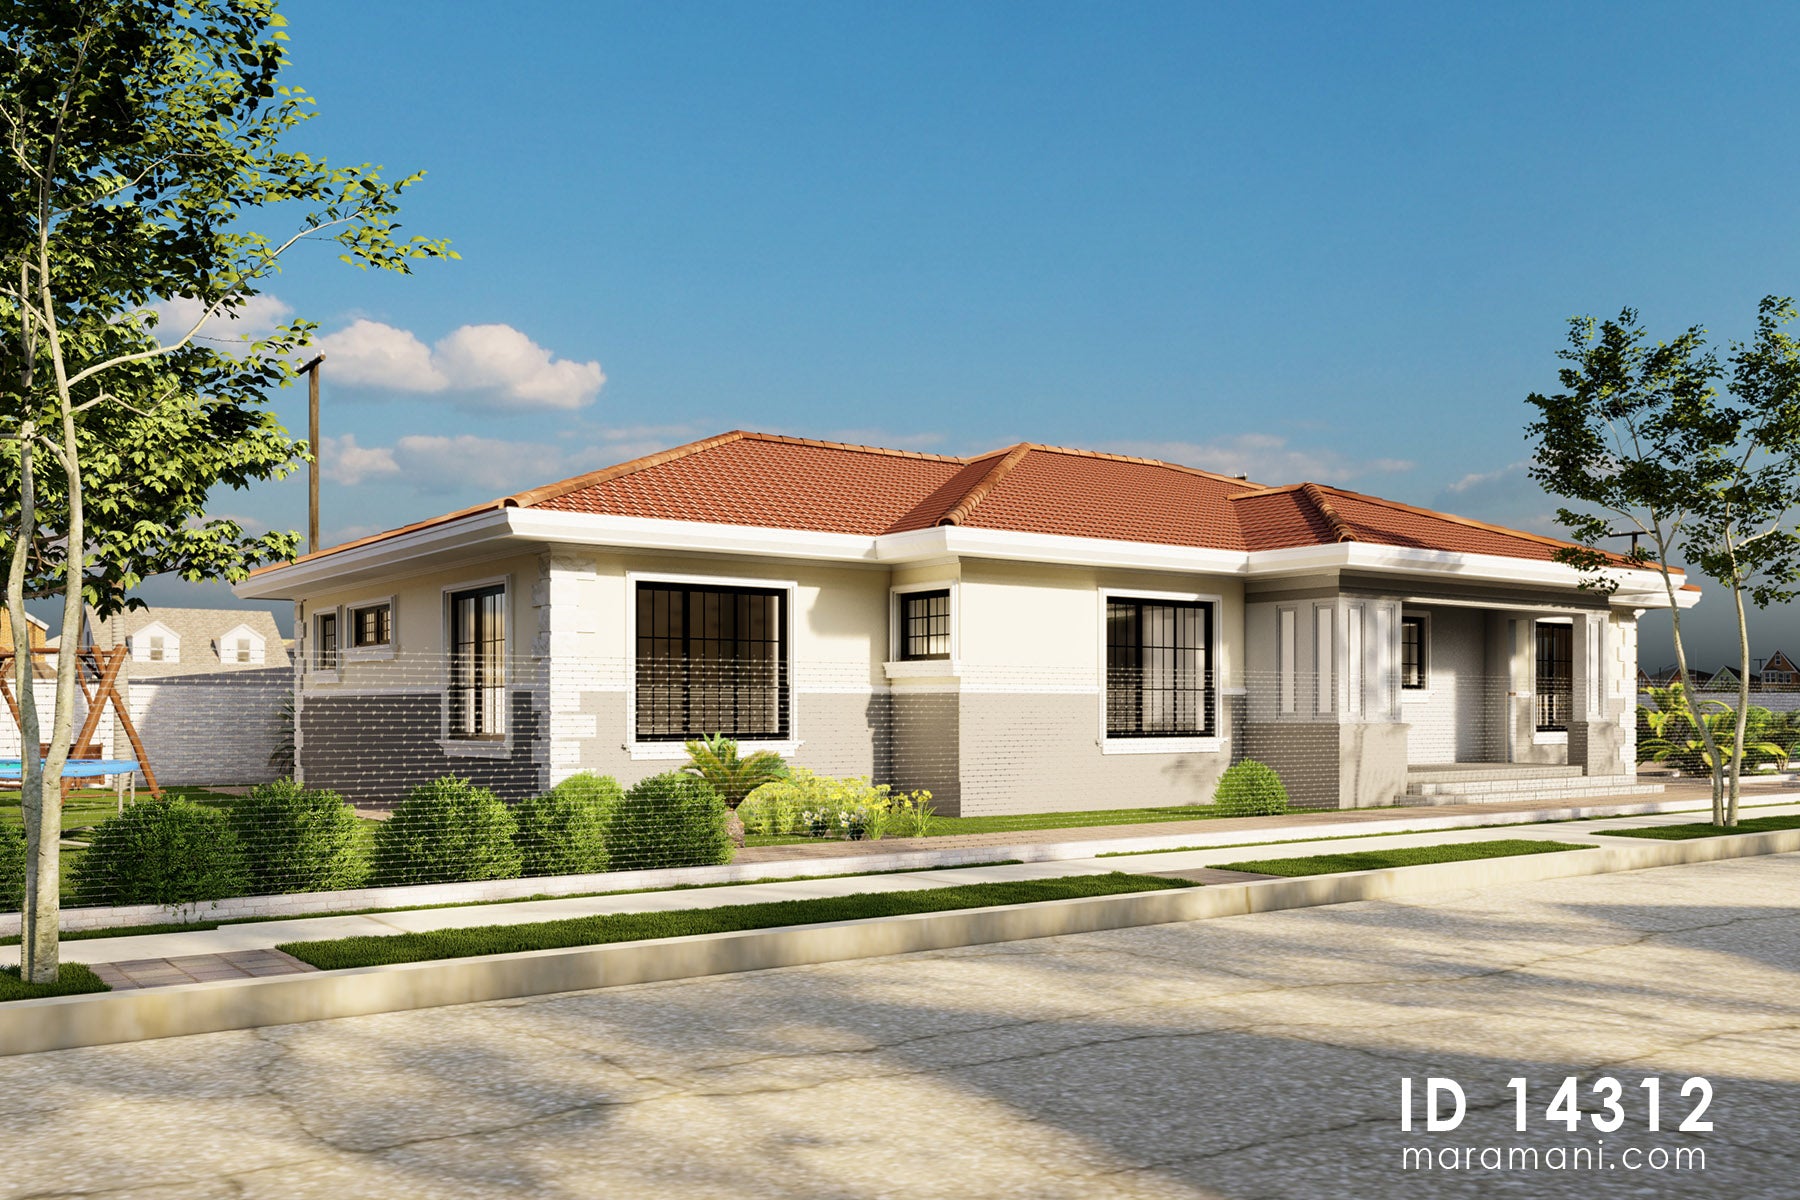 4-Bedroom Hipped roof house - ID 14312